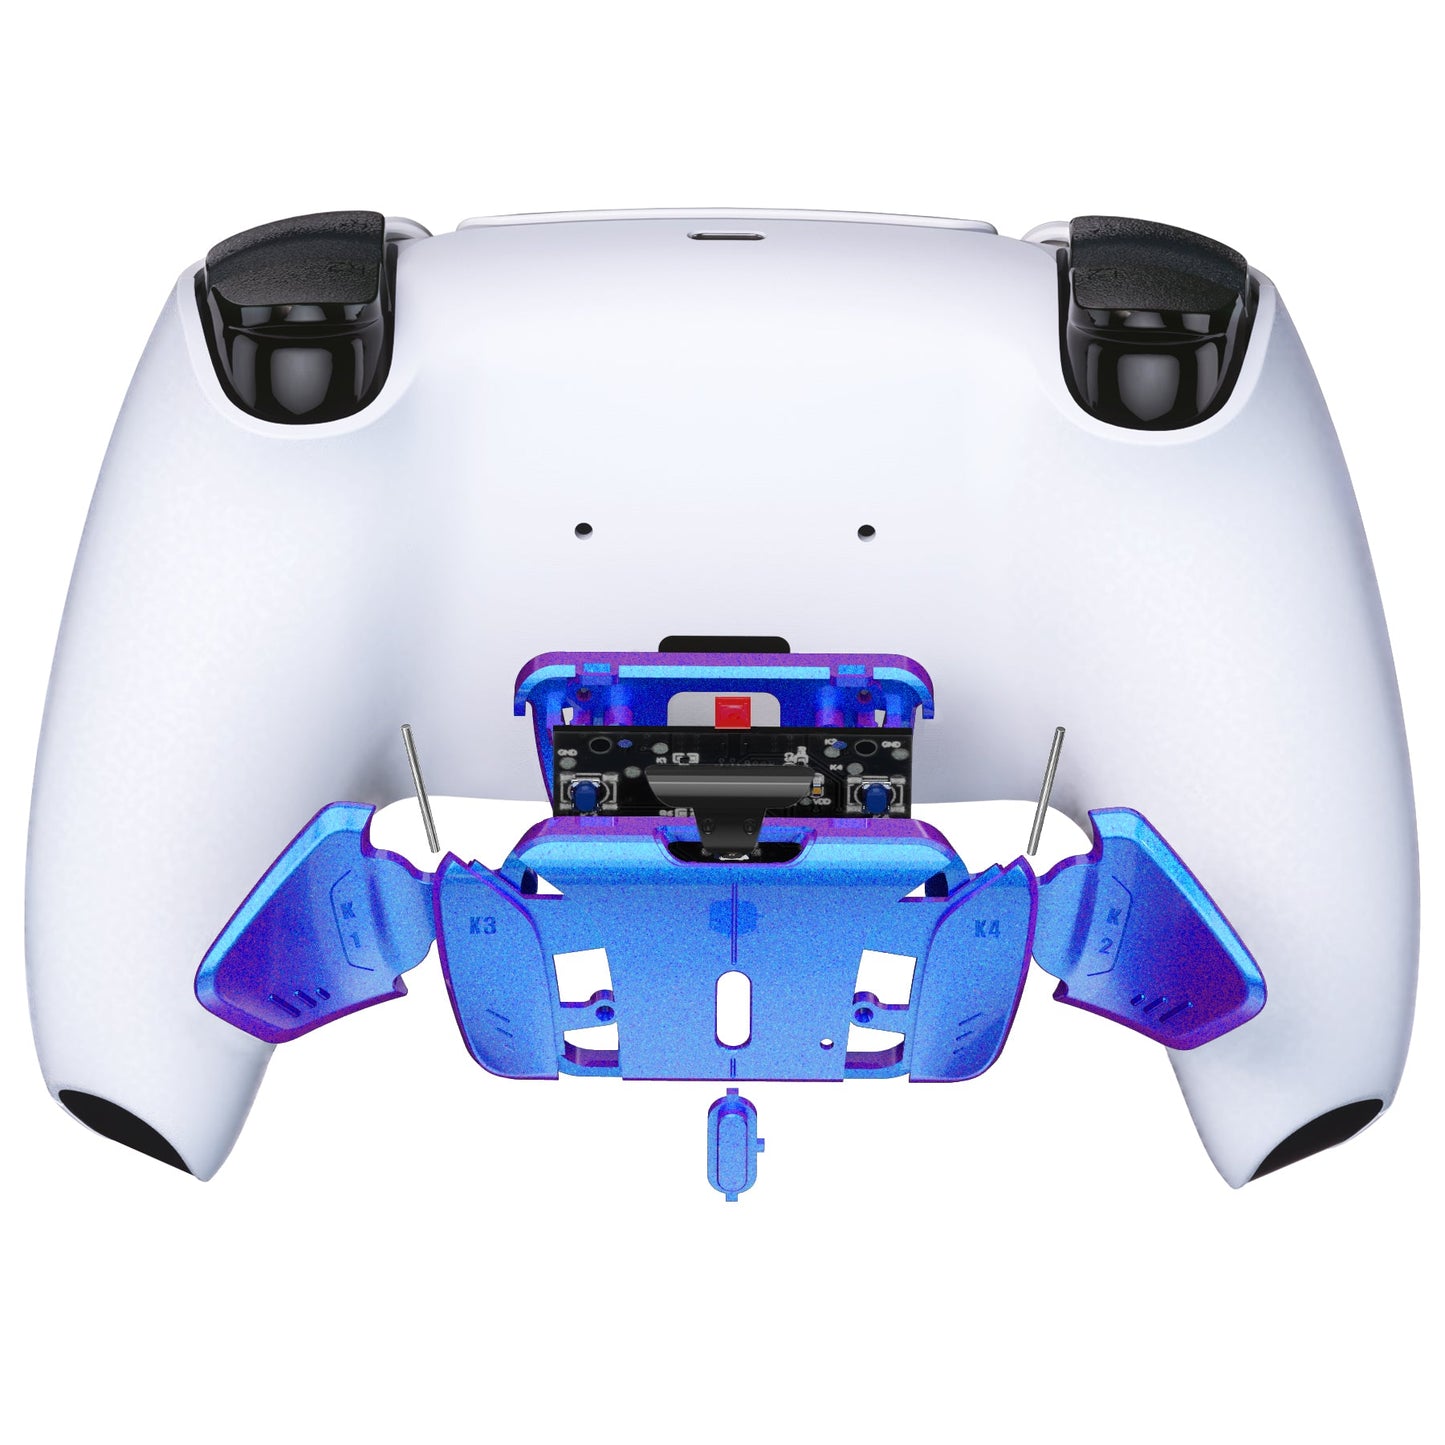 eXtremeRate Retail Turn RISE to RISE4 Kit-Redesigned Chameleon Purple Blue K1 K2 K3 K4 Back Buttons Housing & Remap PCB Board for ps5 Controller eXtremeRate RISE & RISE4 Remap kit - Controller & Other RISE Accessories NOT Included - VPFP3003P